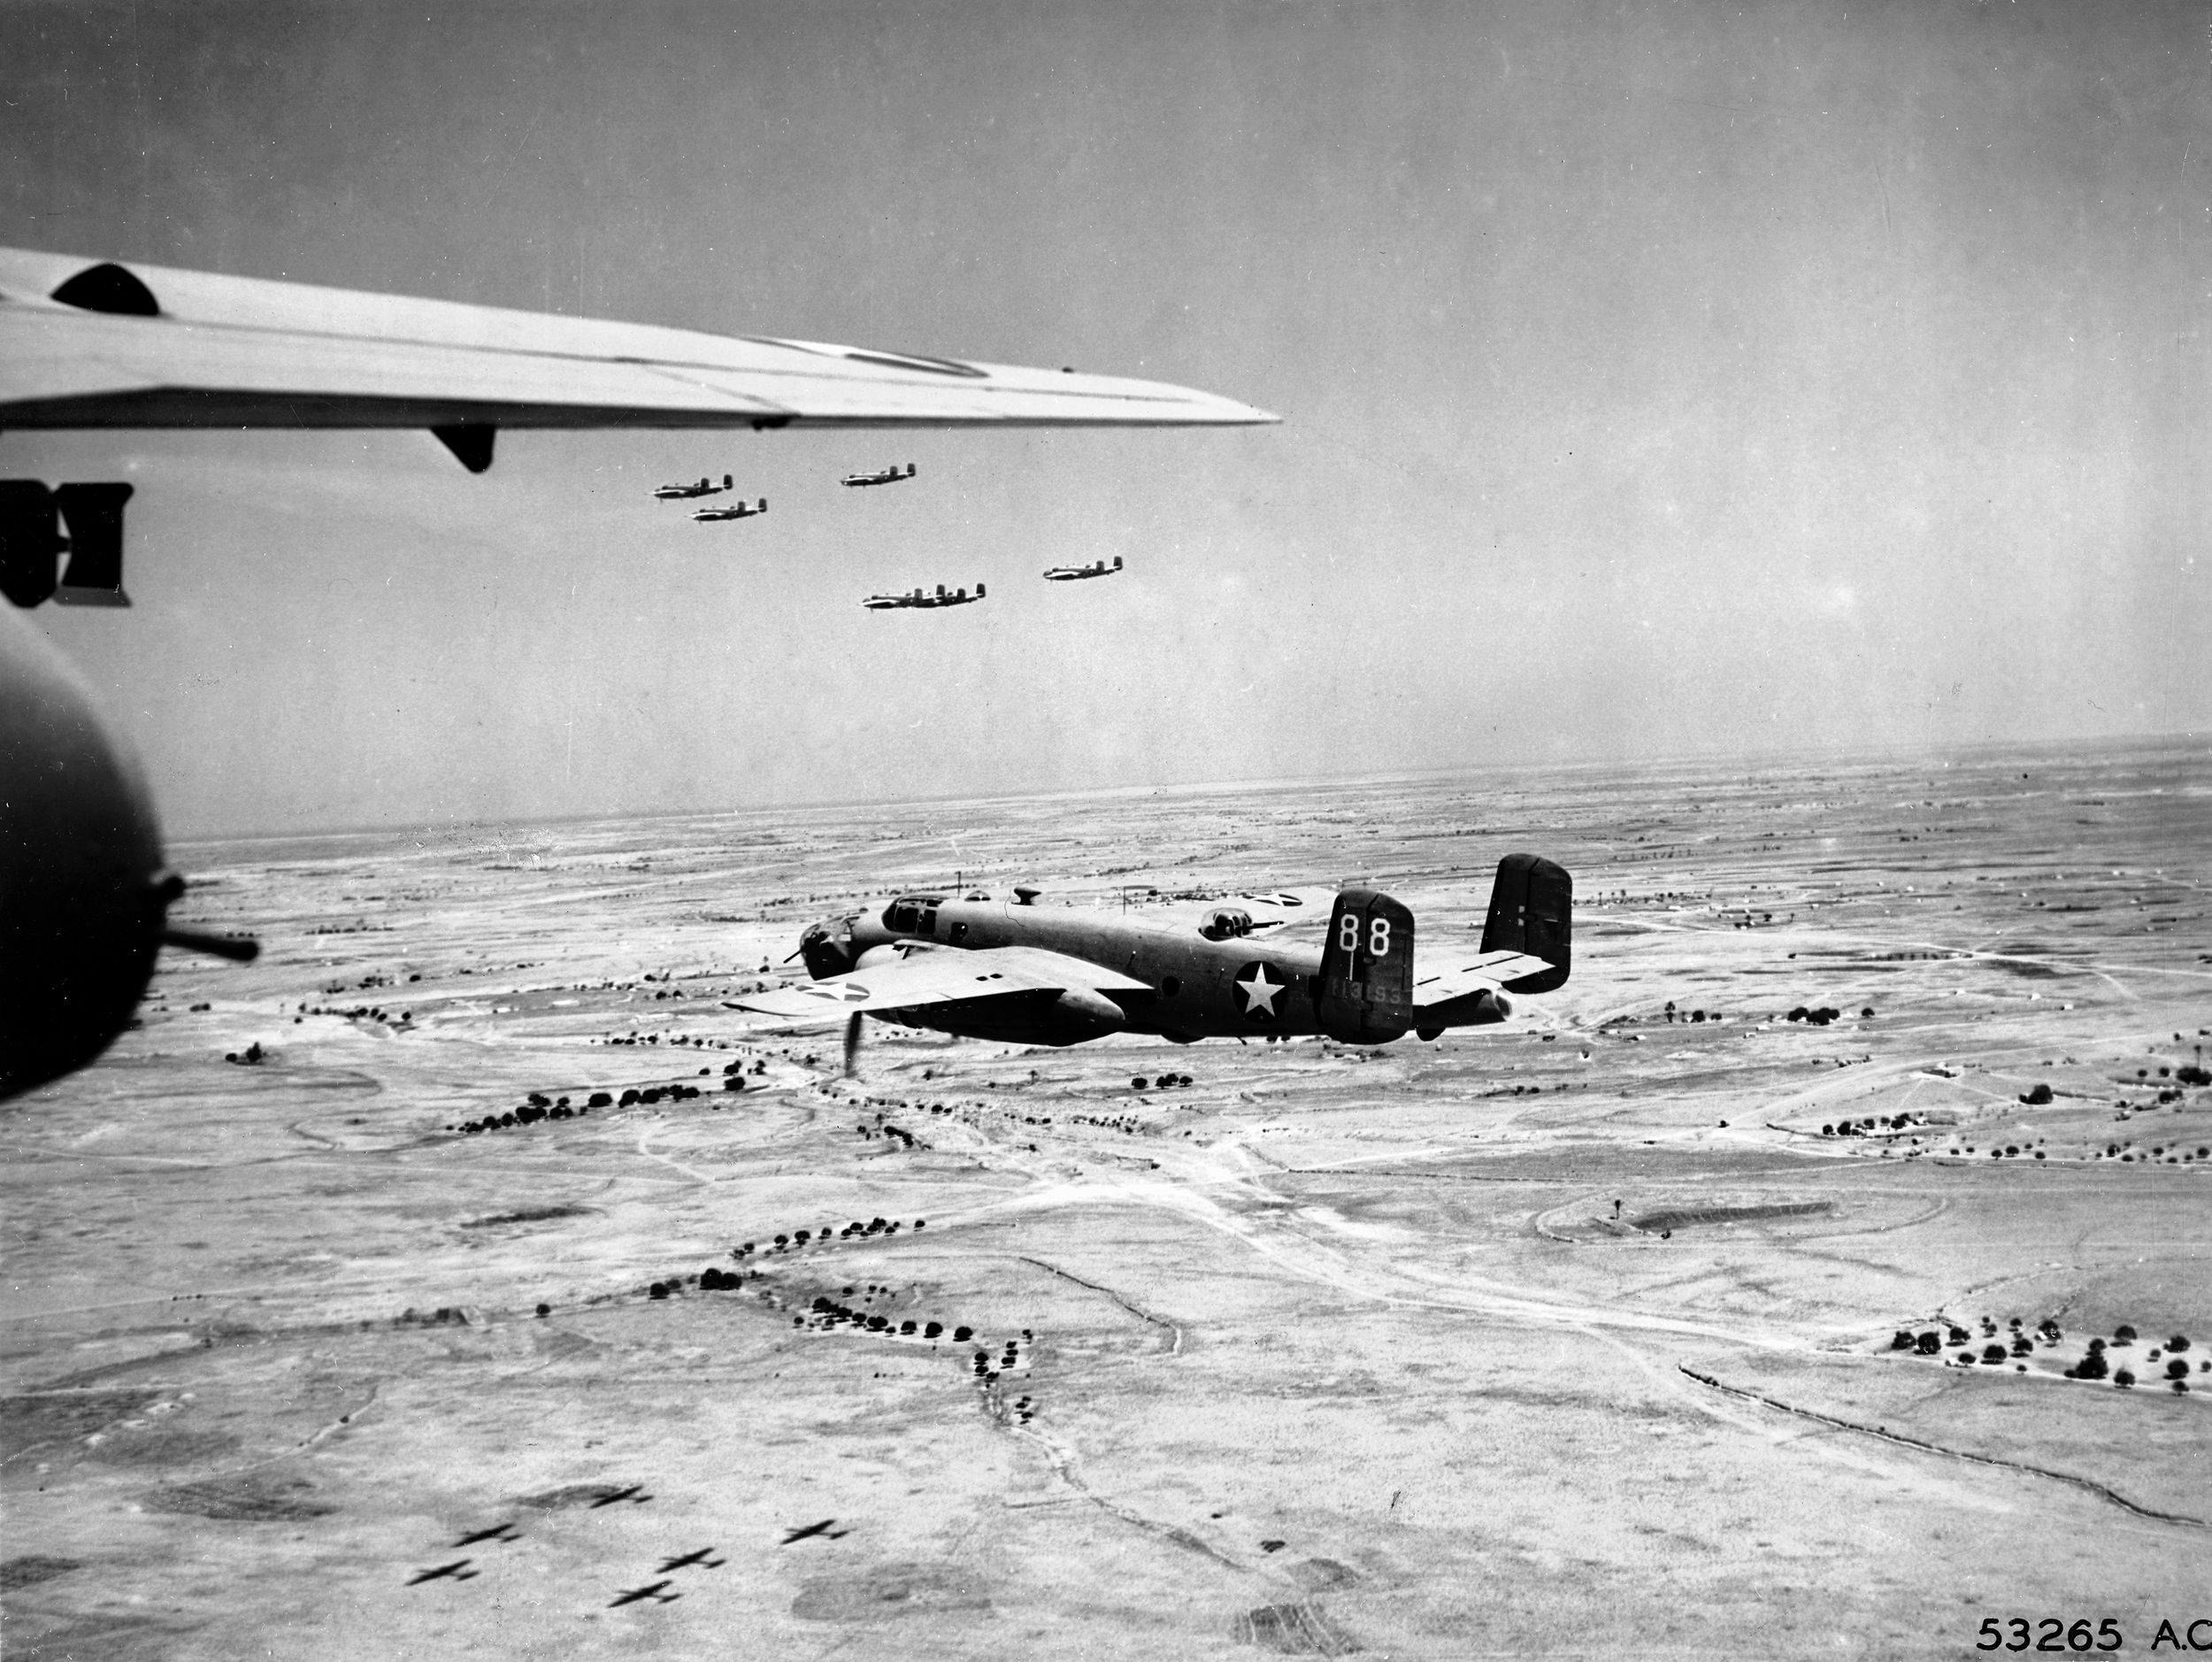 B-25s fly over Tunisia. Ernst’s plane left North Africa en route to Palermo when it was shot down over the Mediterranean. Ernst, the only survivor from his plane, swam for 18 hours to reach land.